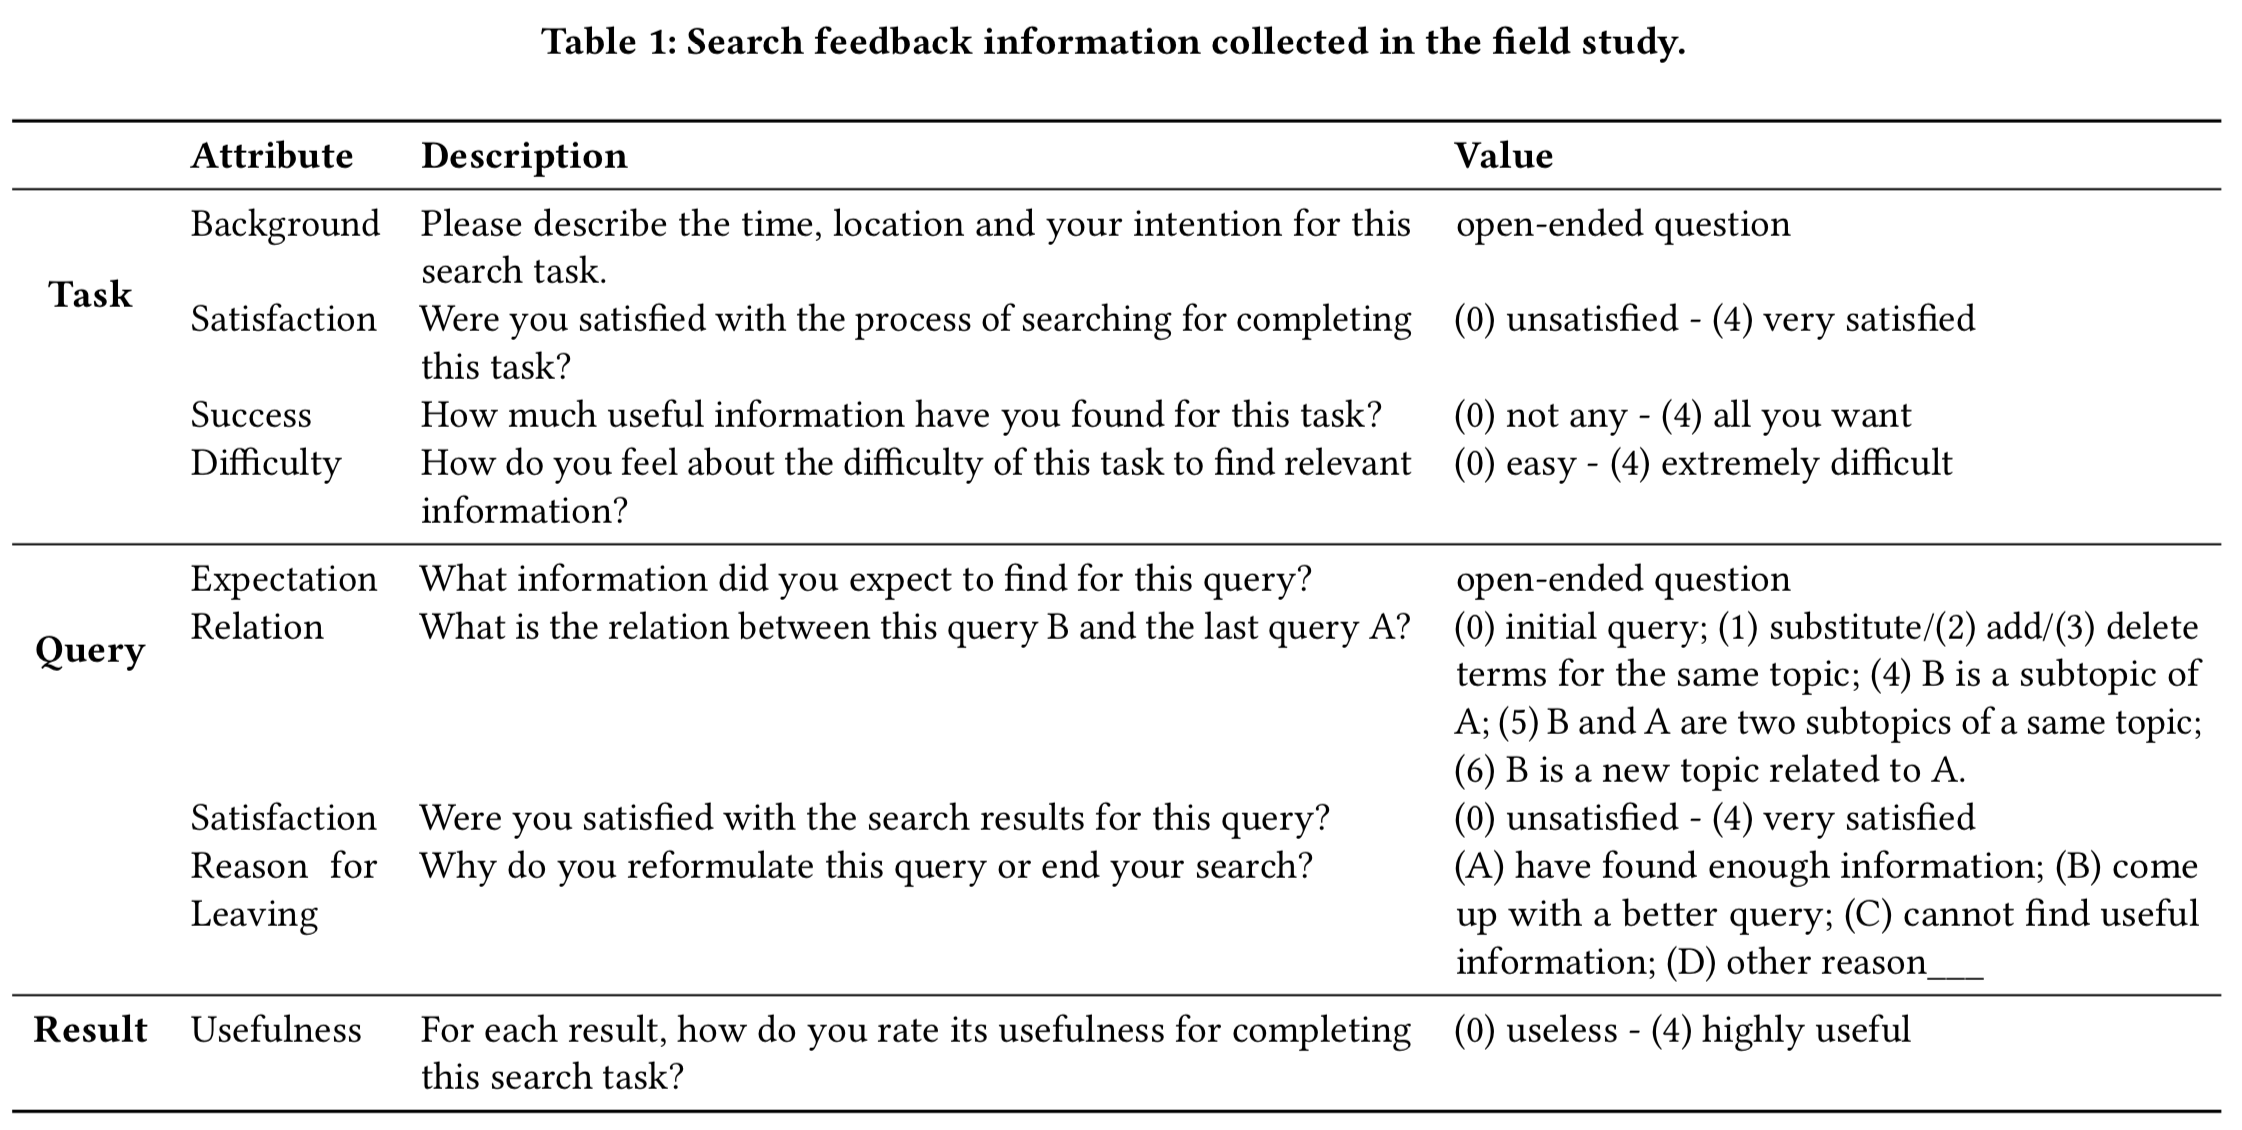 Table 1: Search feedback information collected in the field study.